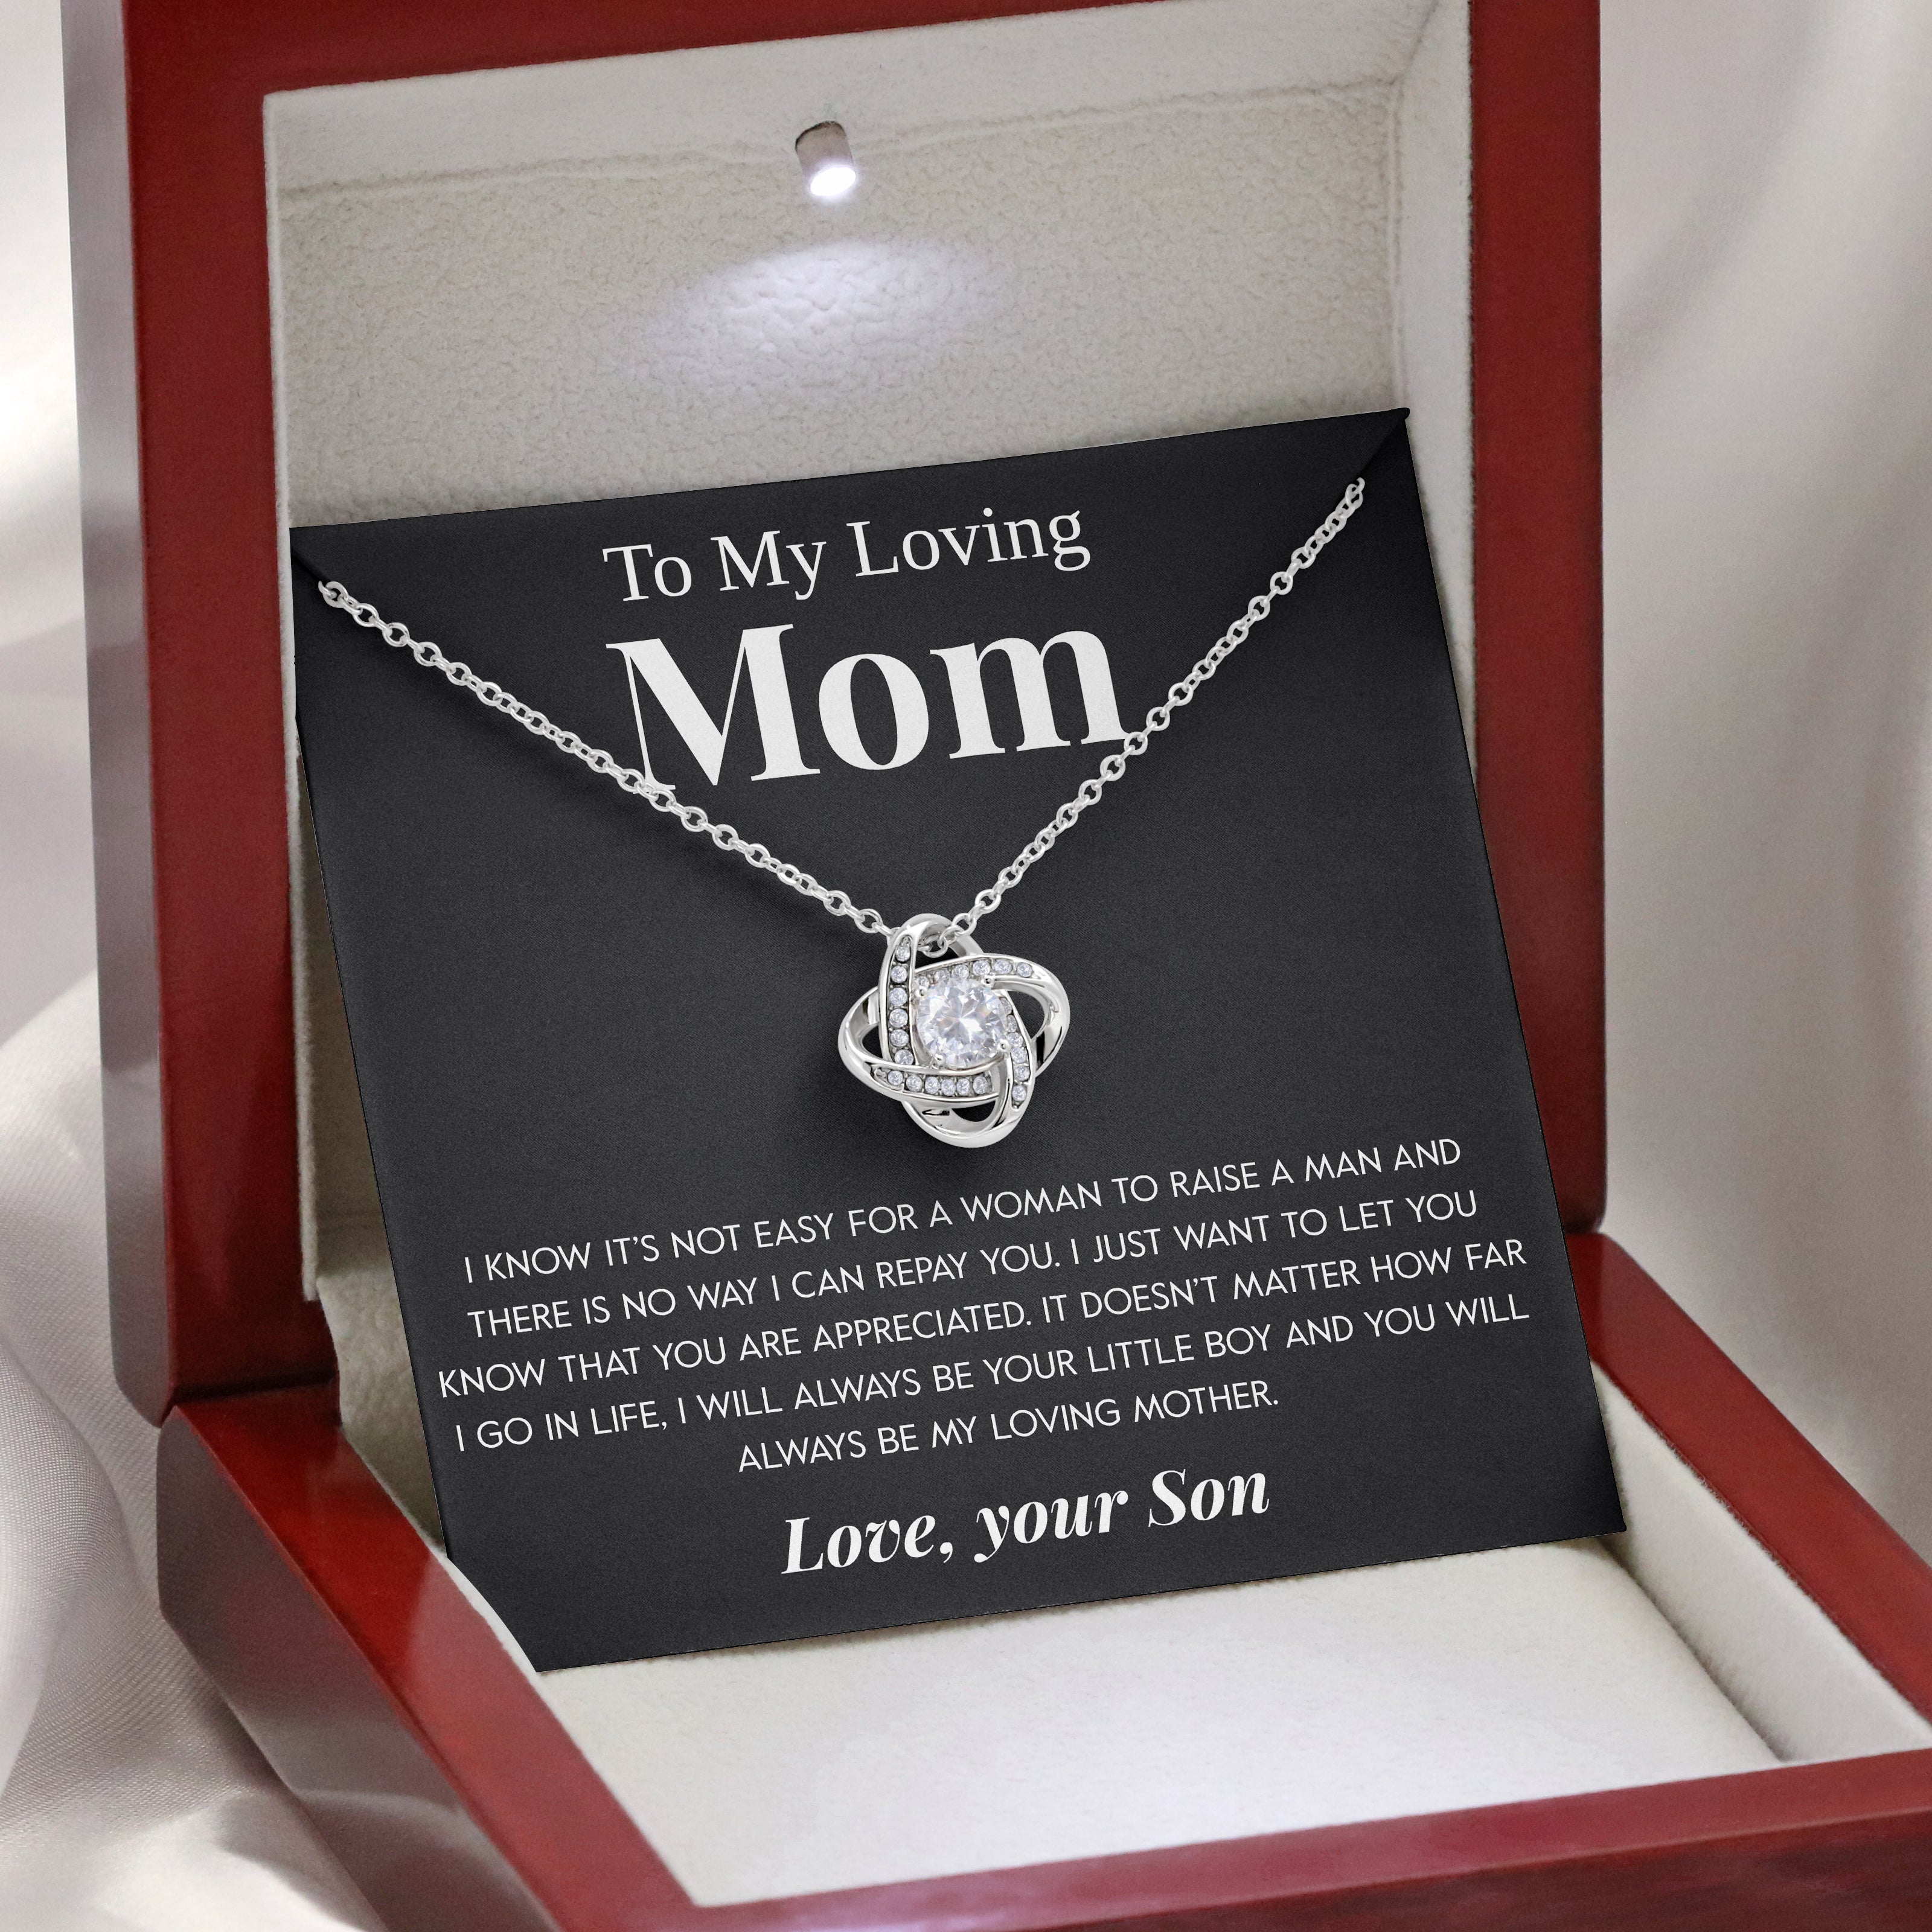 To My Loving Mom | "My Loving Mother" | Love Knot Necklace